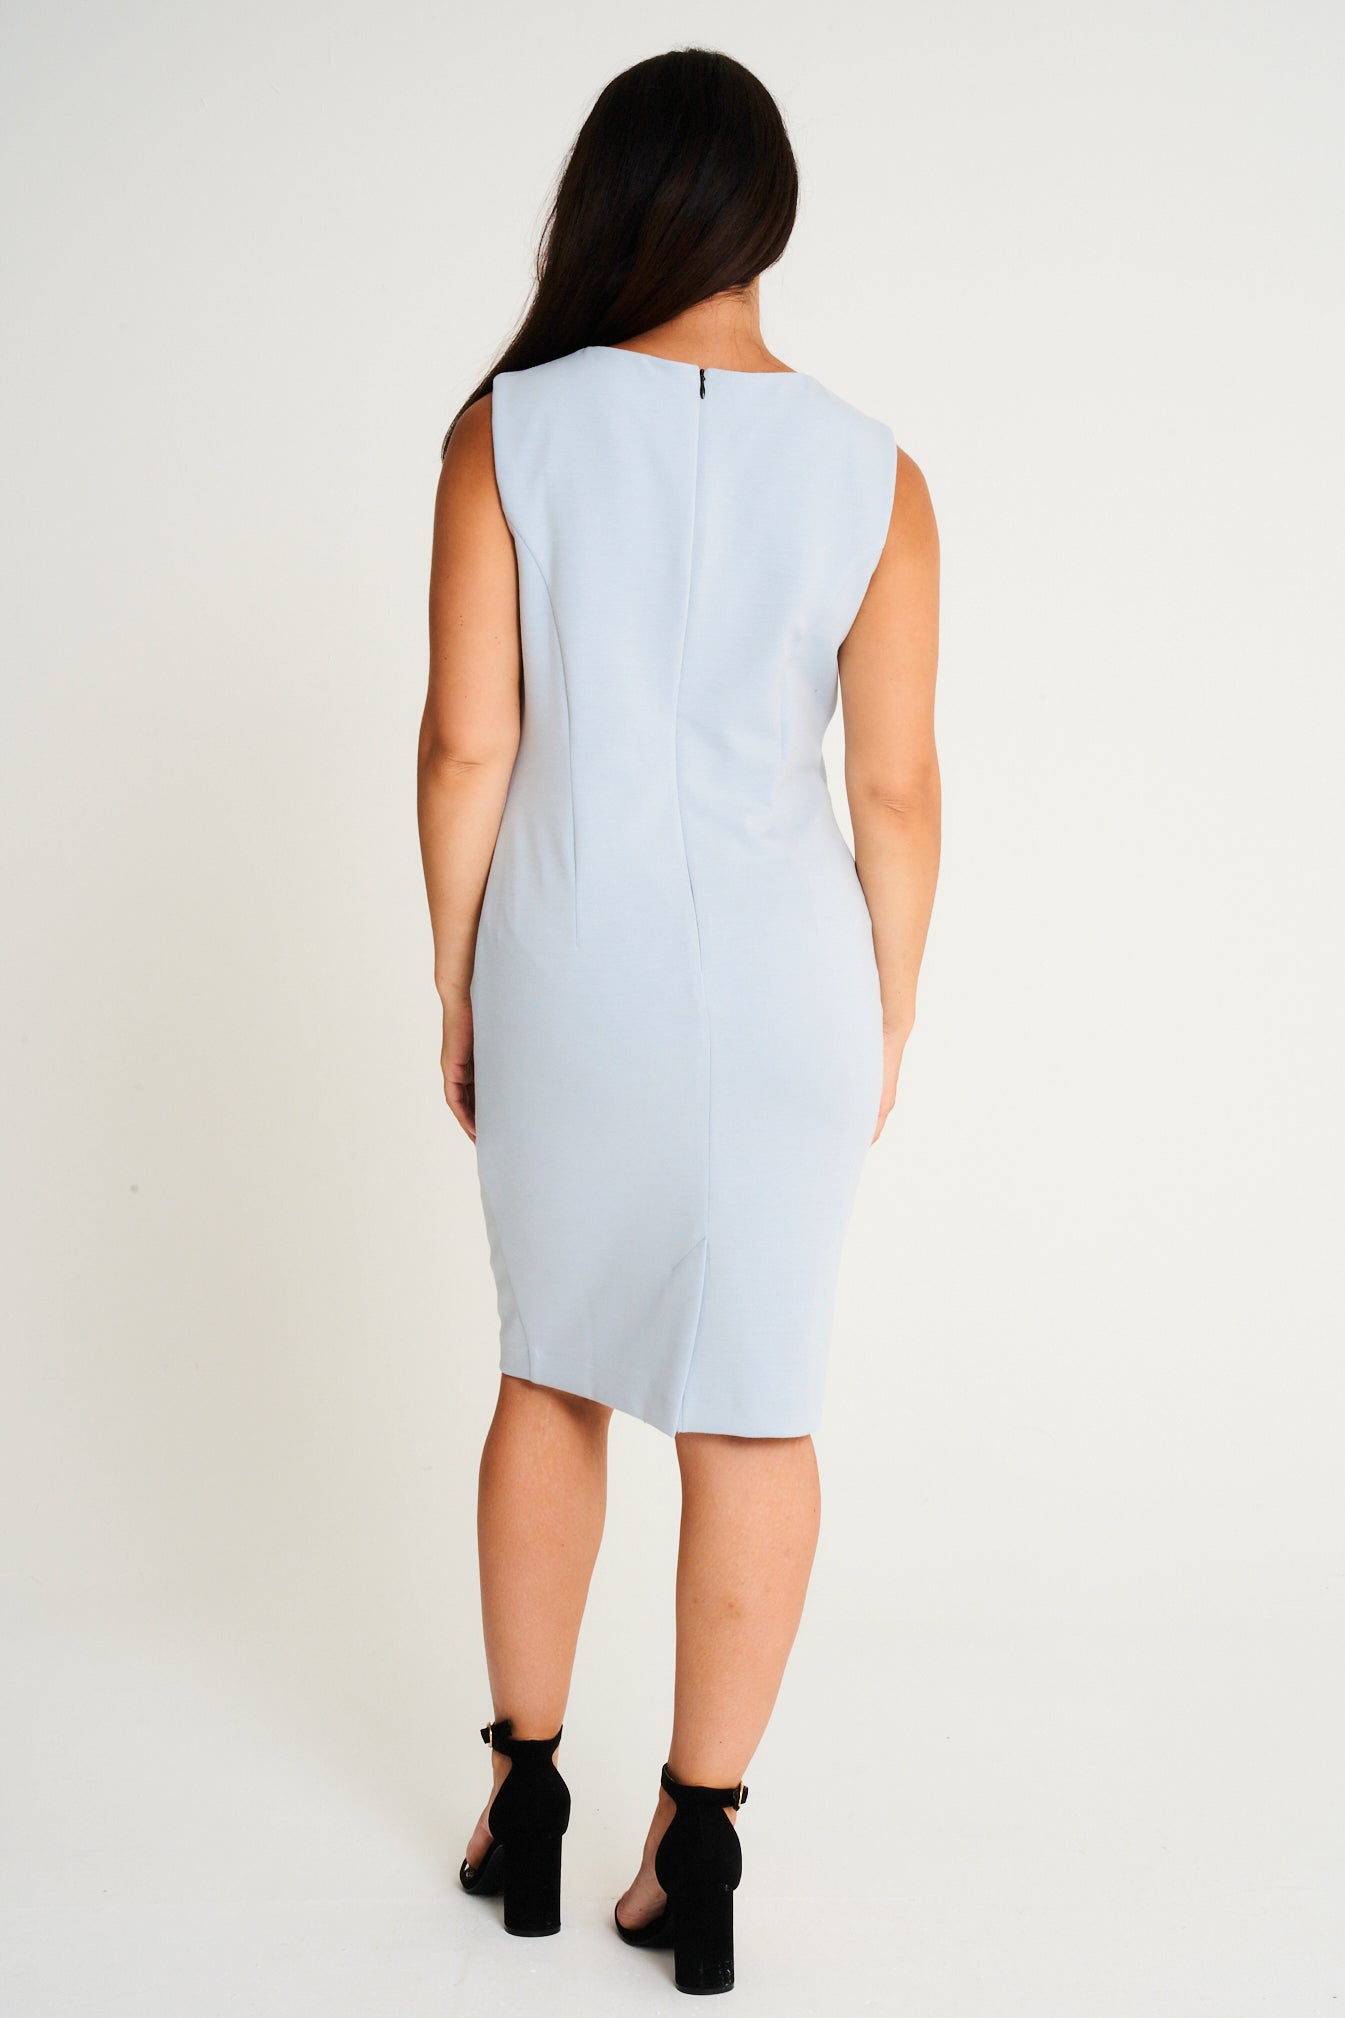 The MAYFAIR dress in pastel blue